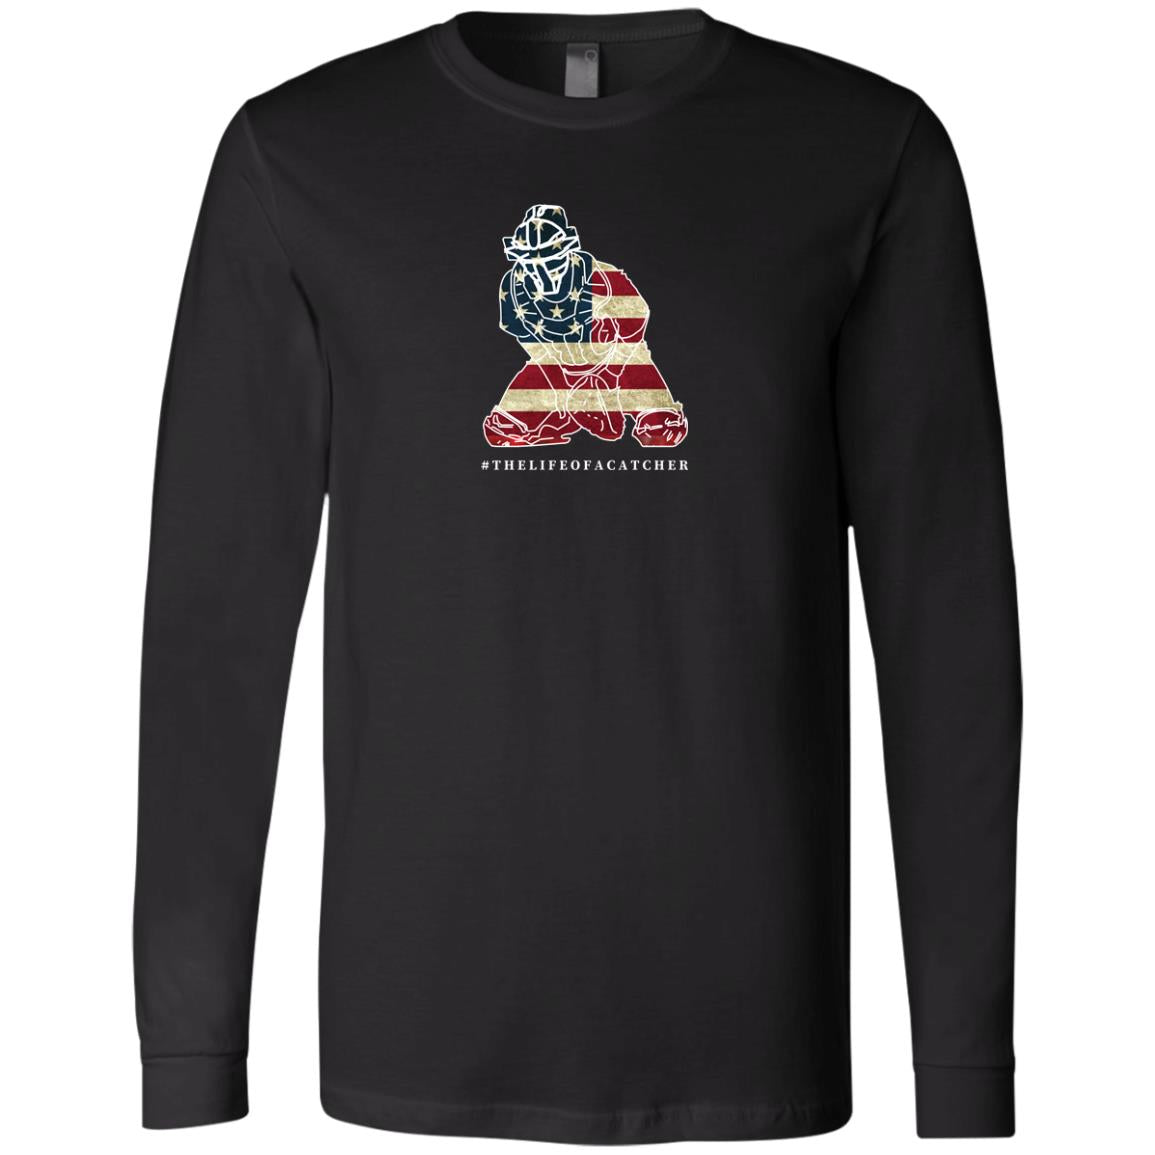 The-Catching-Guy-Flag-black-long-sleeve-tee-catcher